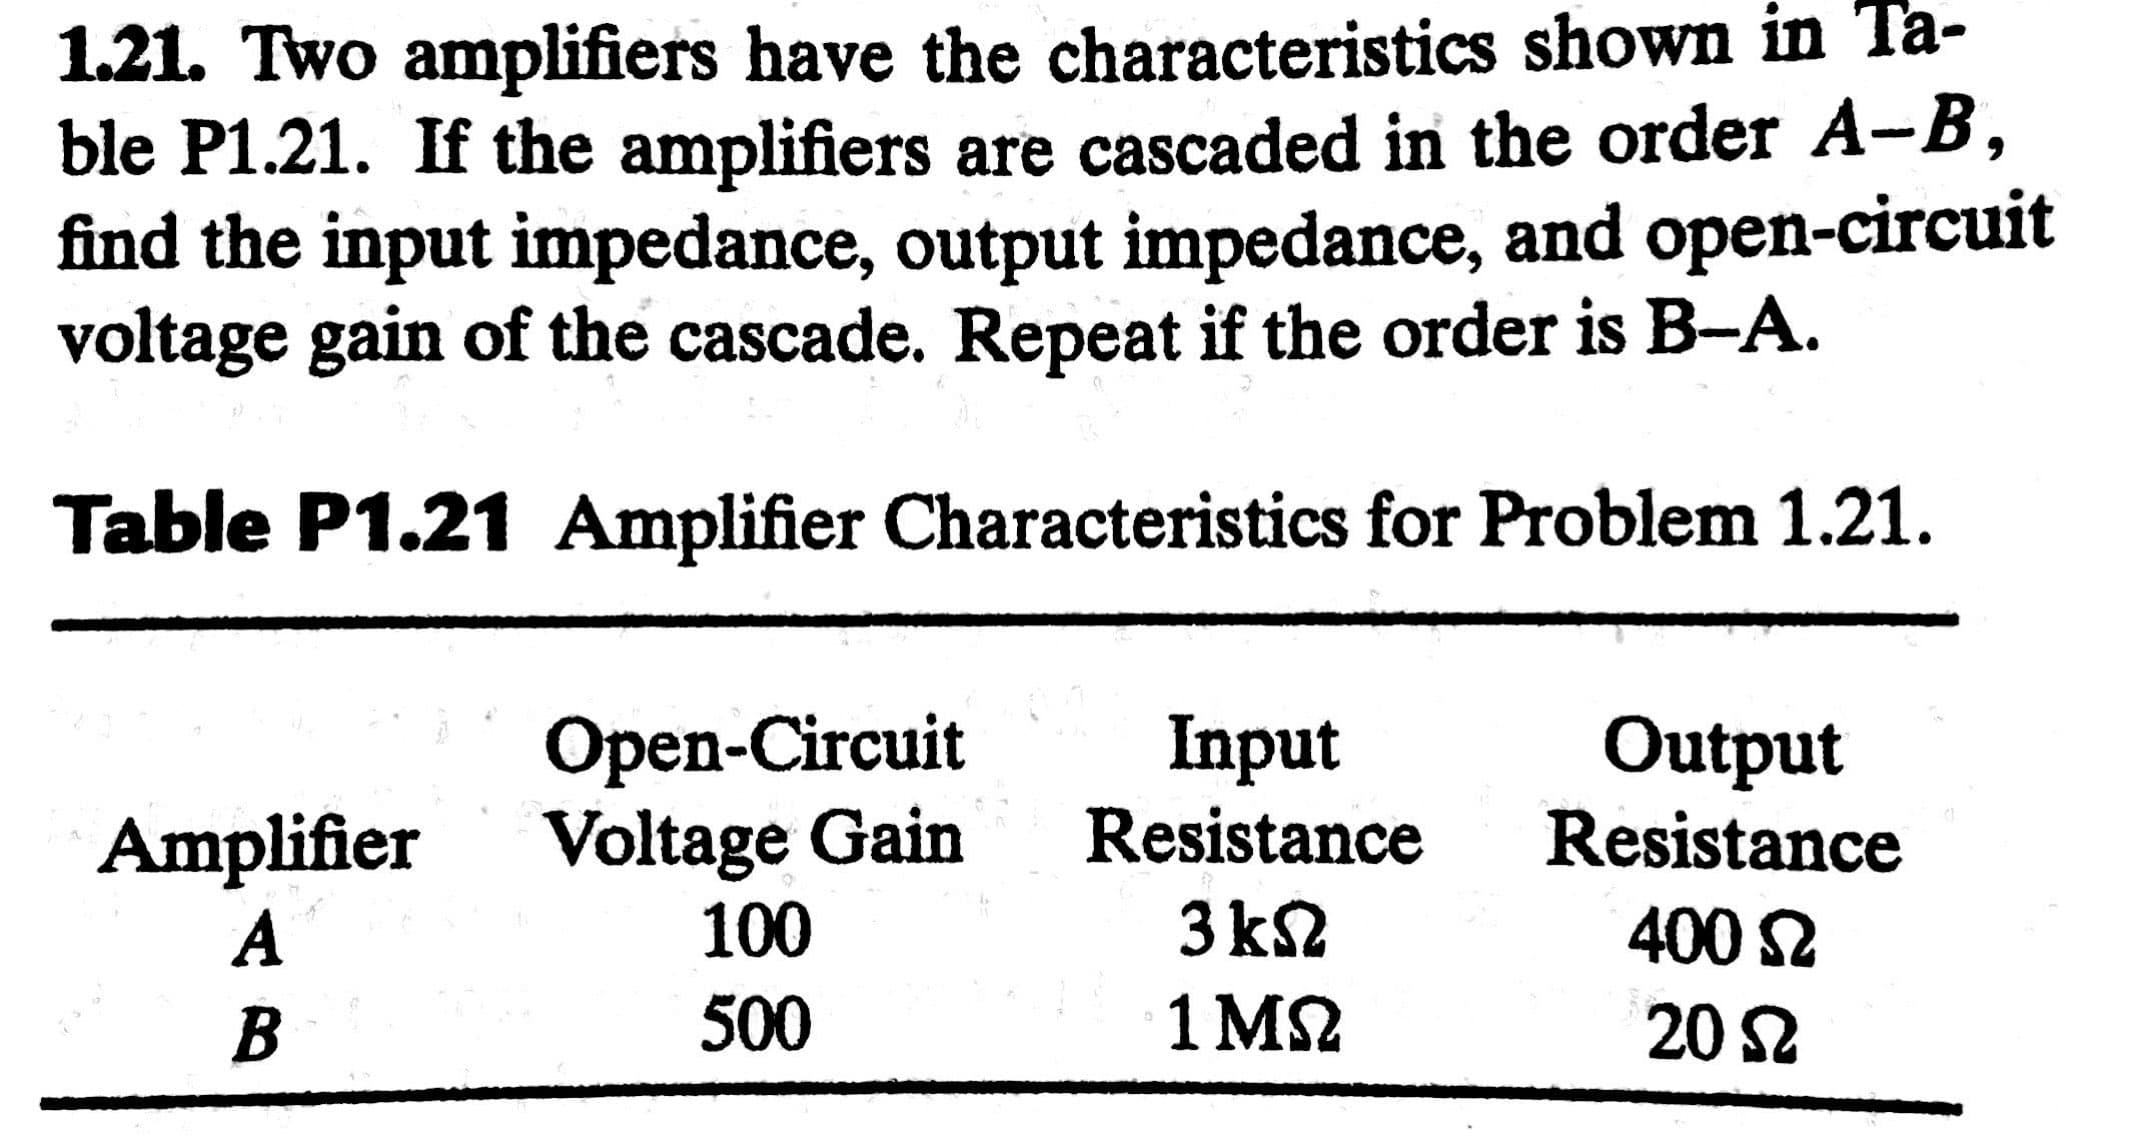 1.21. Two amplifiers have the characteristics shown in Ta-
ble P1.21. If the amplifiers are cascaded in the order A-B,
find the input impedance, output impedance, and open-circuit
voltage gain of the cascade. Repeat if the order is B-A.
Table P1.21 Amplifier Characteristics for Problem 1.21.
Open-Circuit
Voltage Gain
100
Input
Resistance
Output
Resistance
Amplifier
A
3 k2
400 S2
500
1 M2
20 2
B
